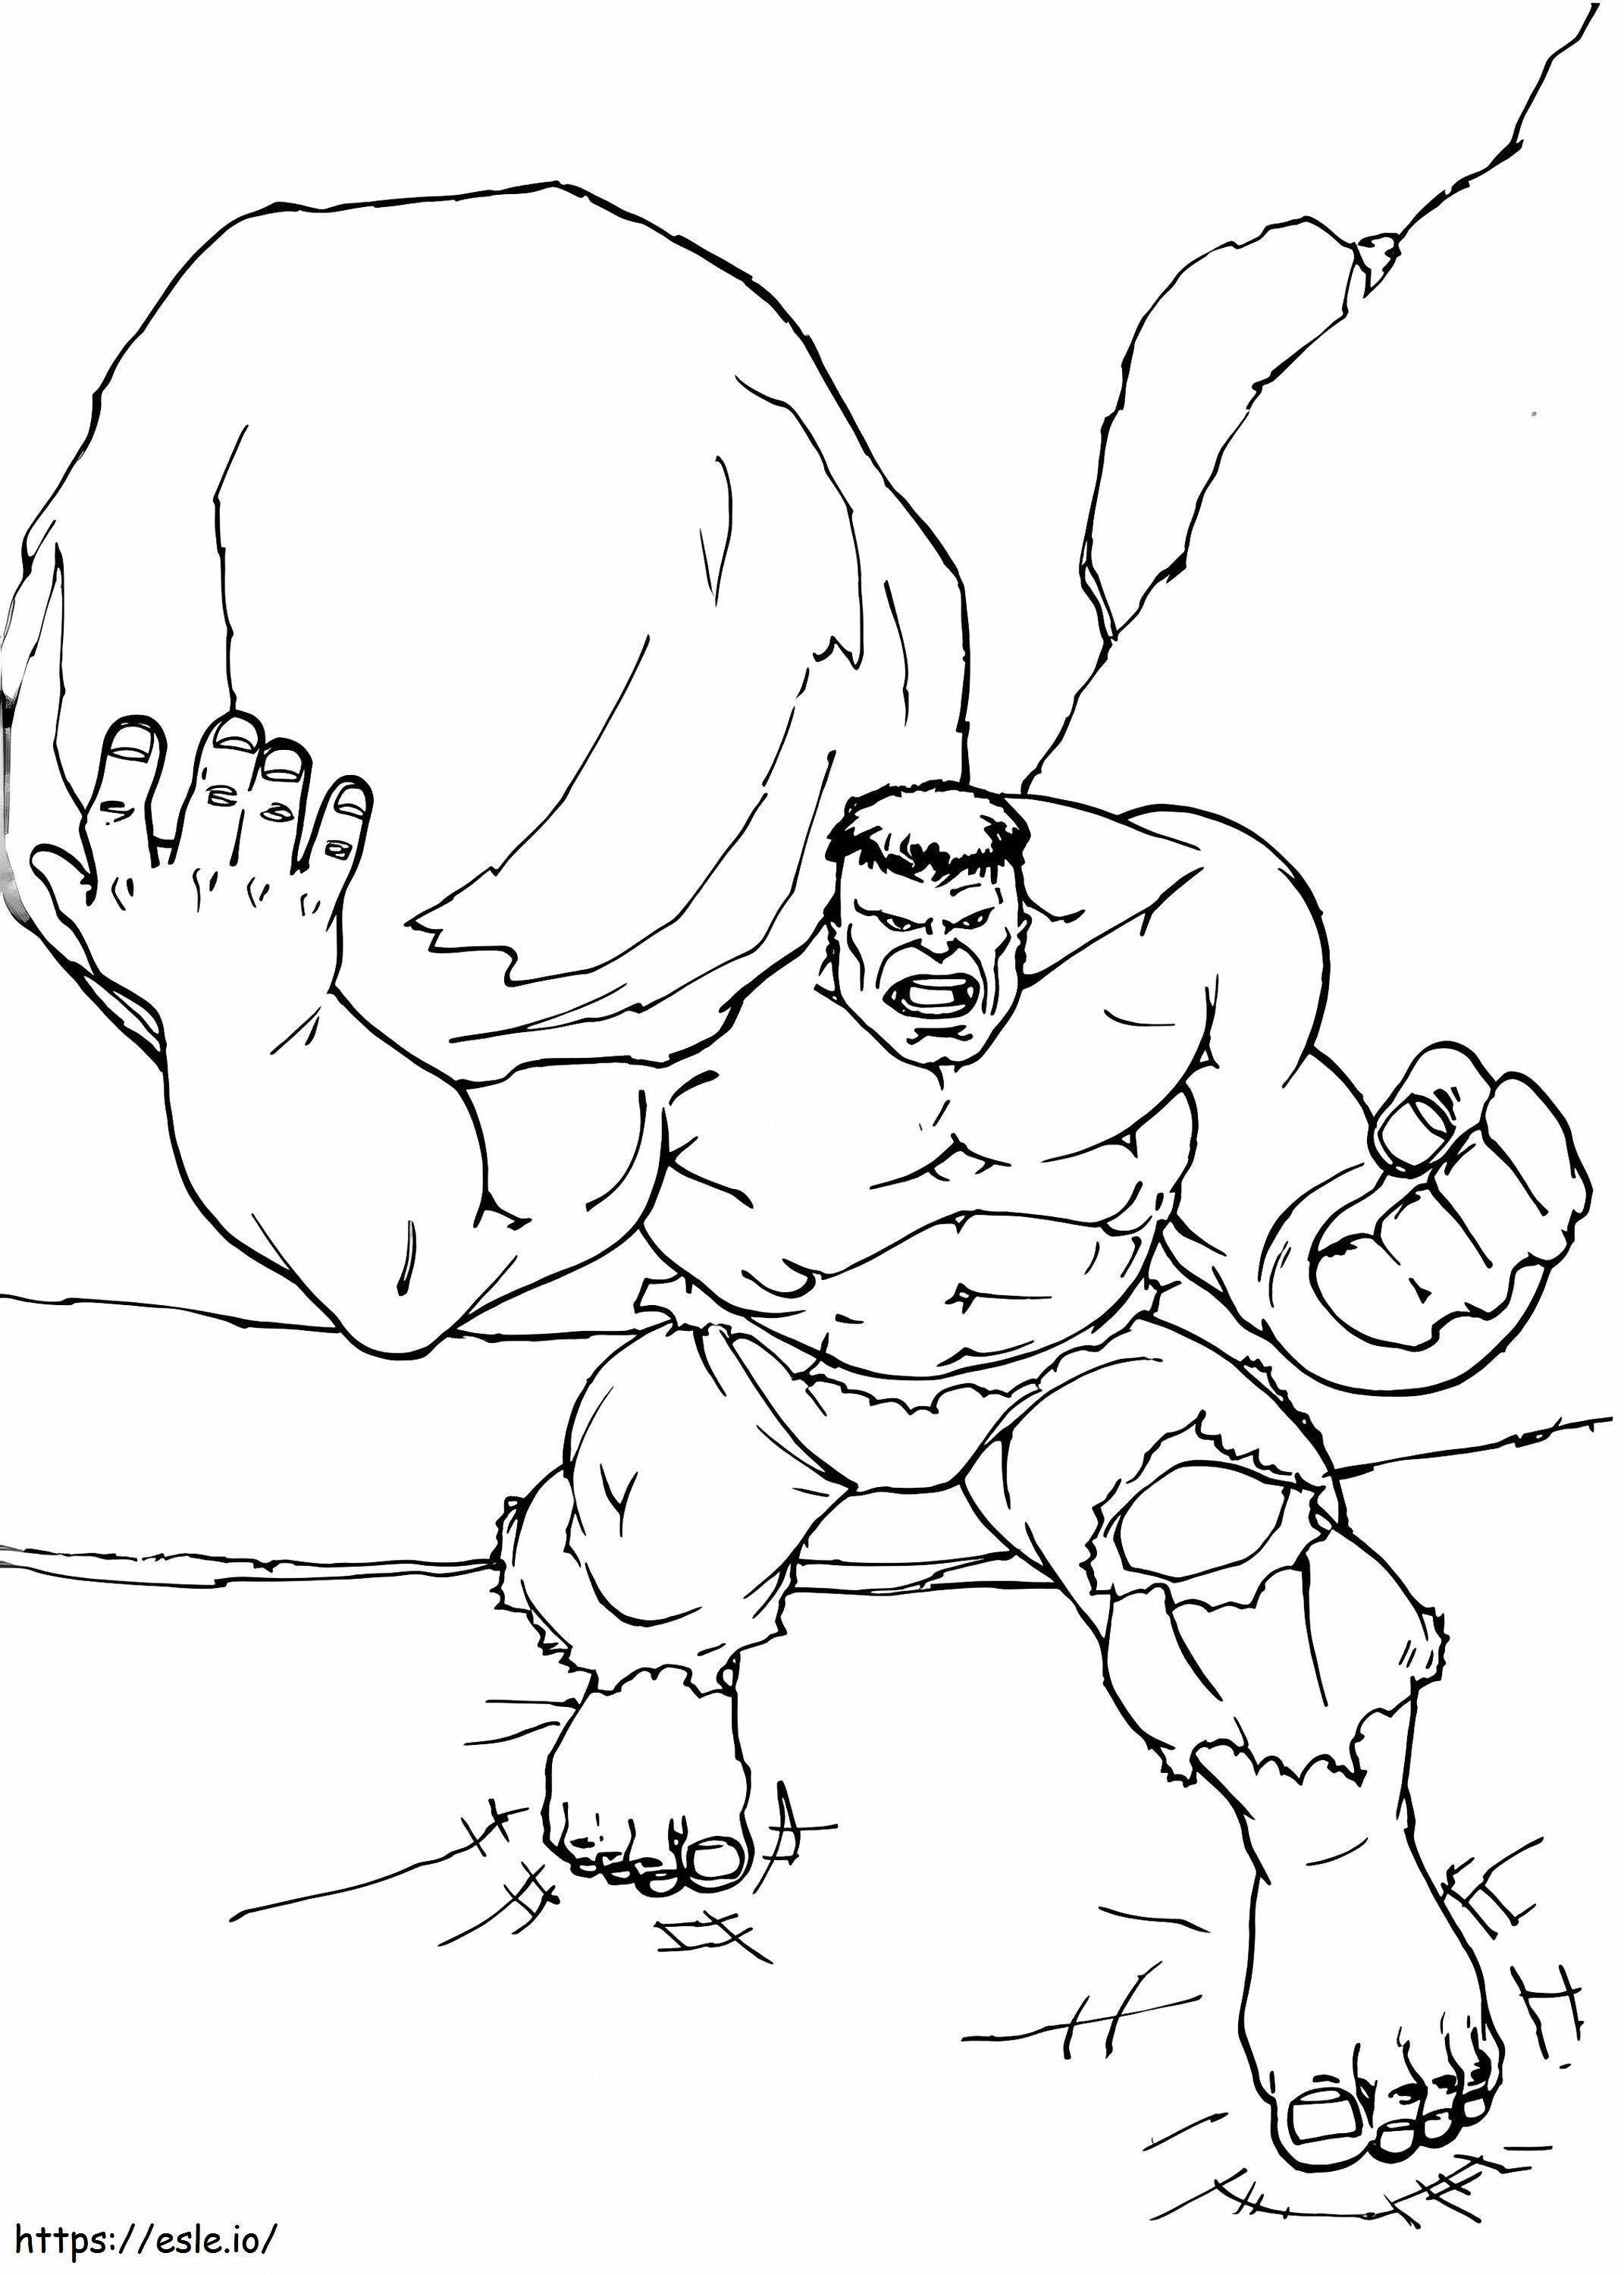 1534493296 Hulk Holding Rock A4 coloring page